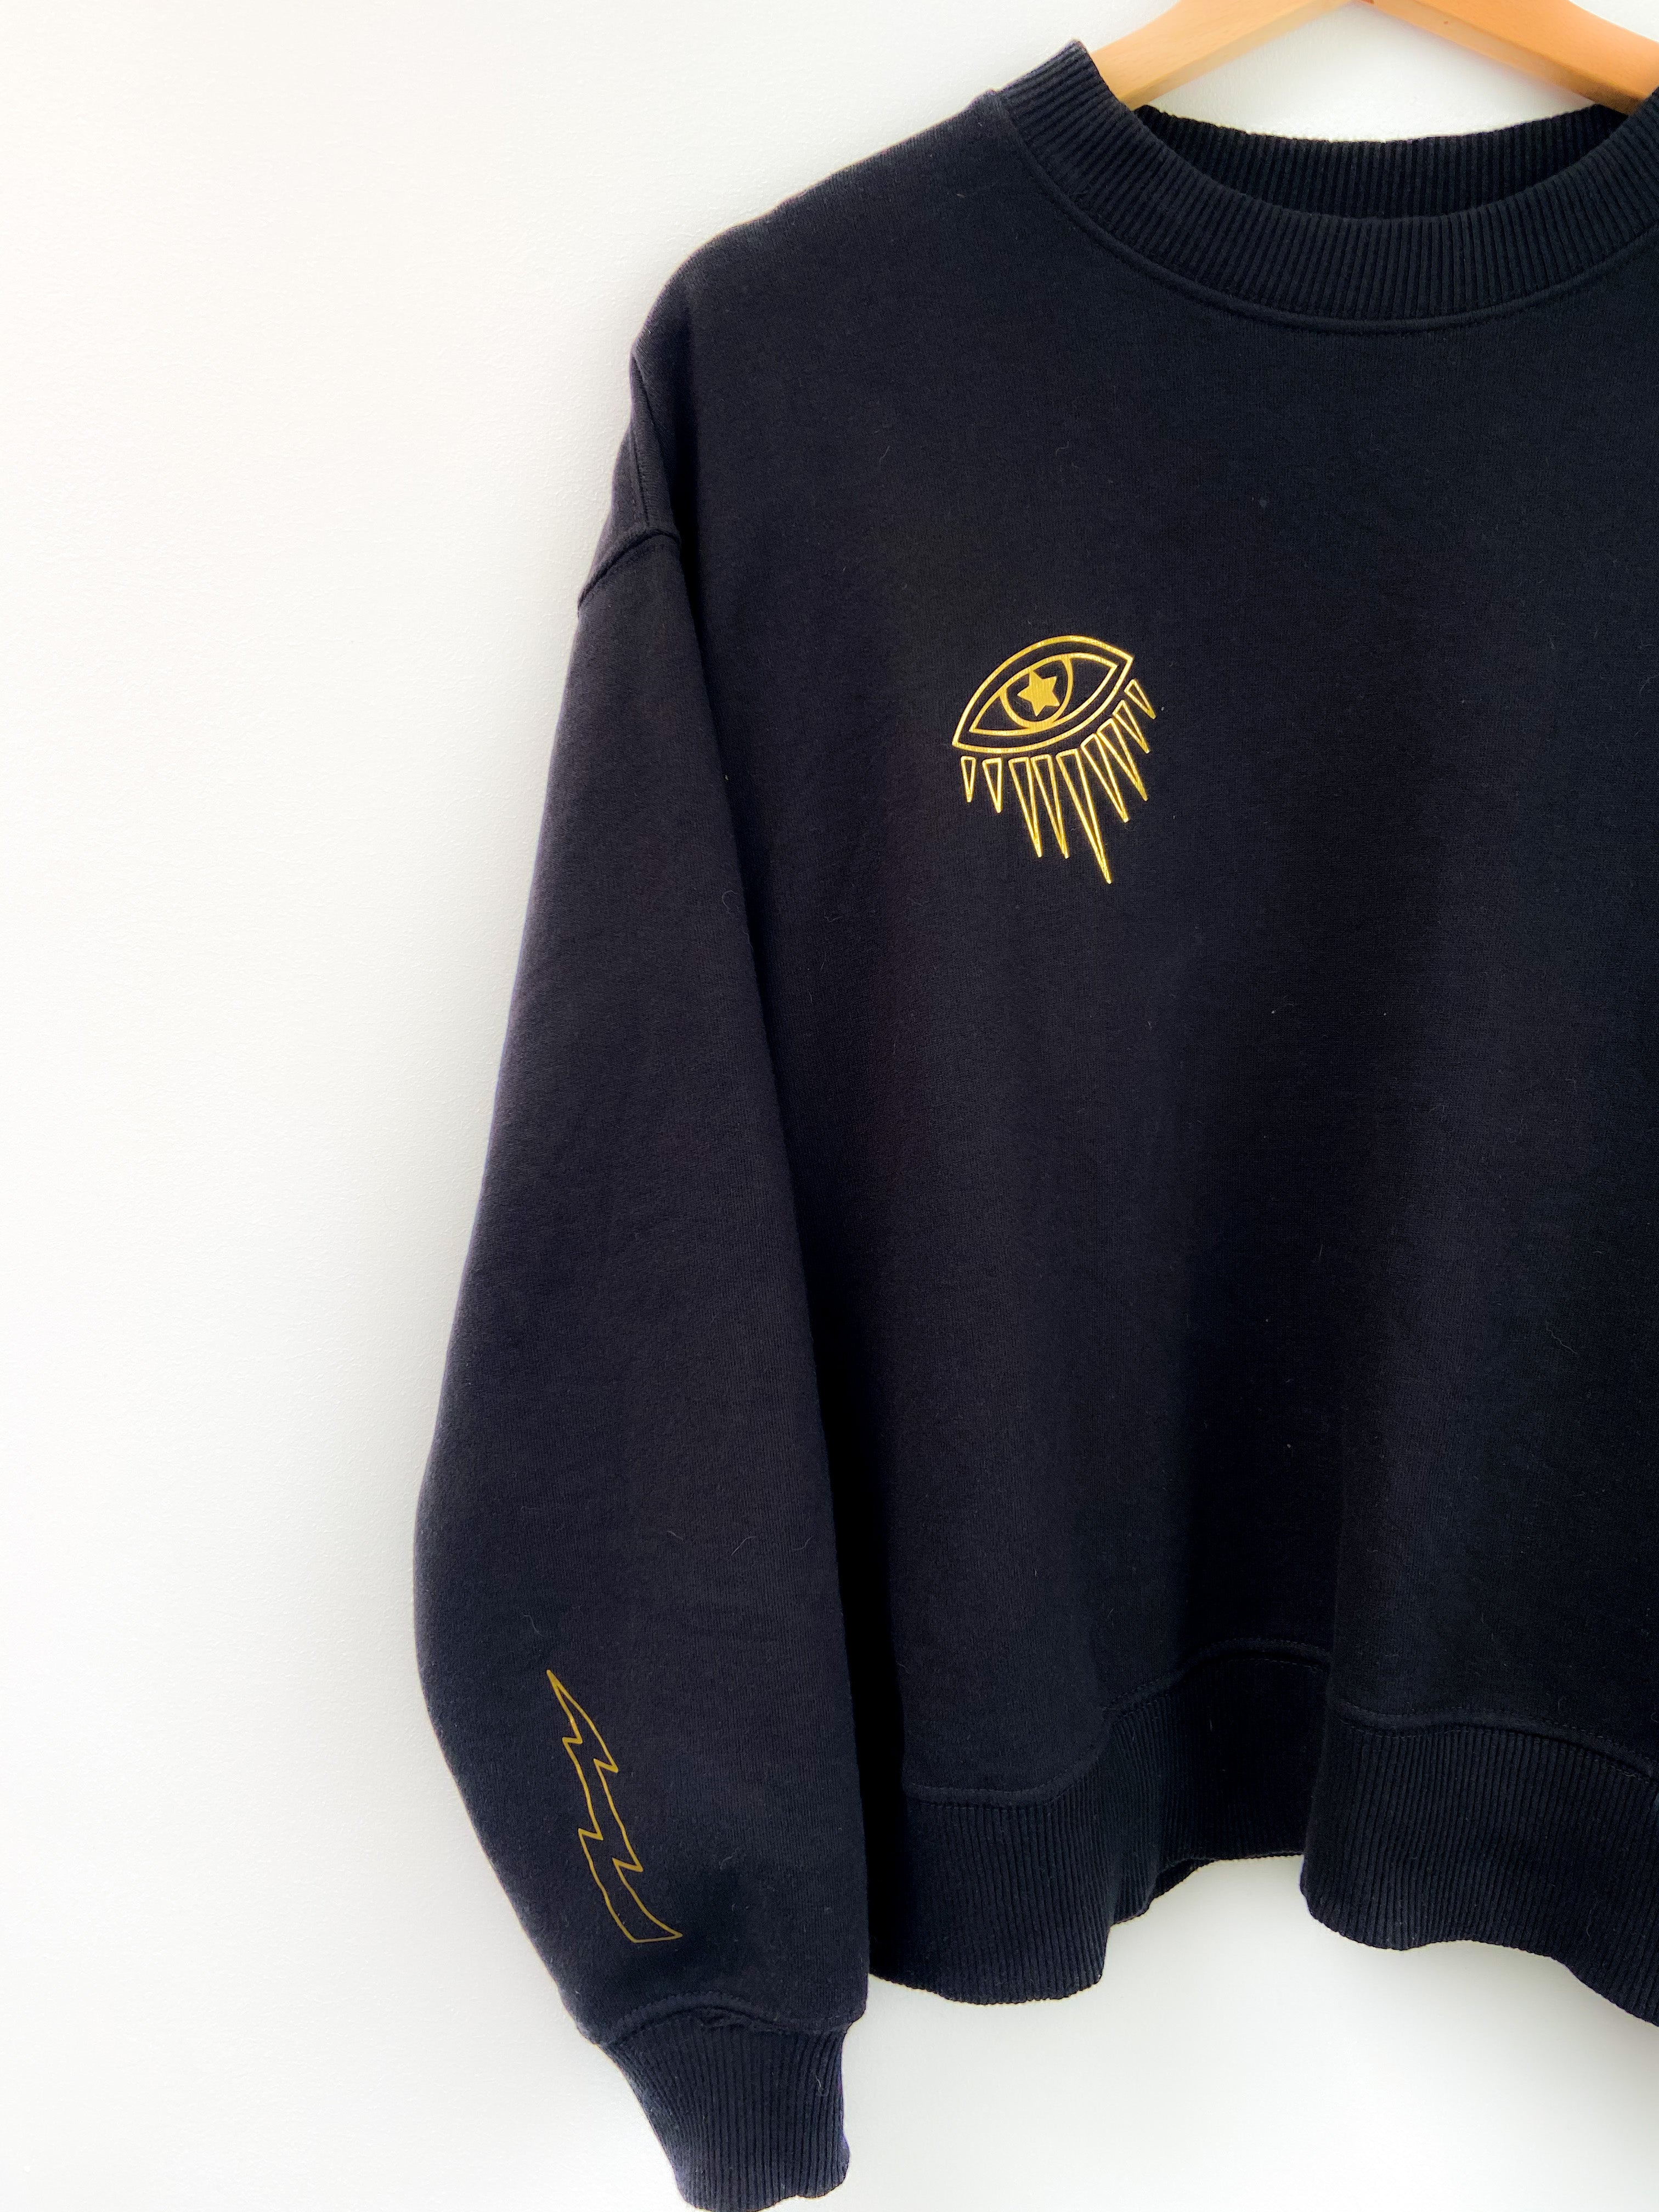 Black sweater with gold eye